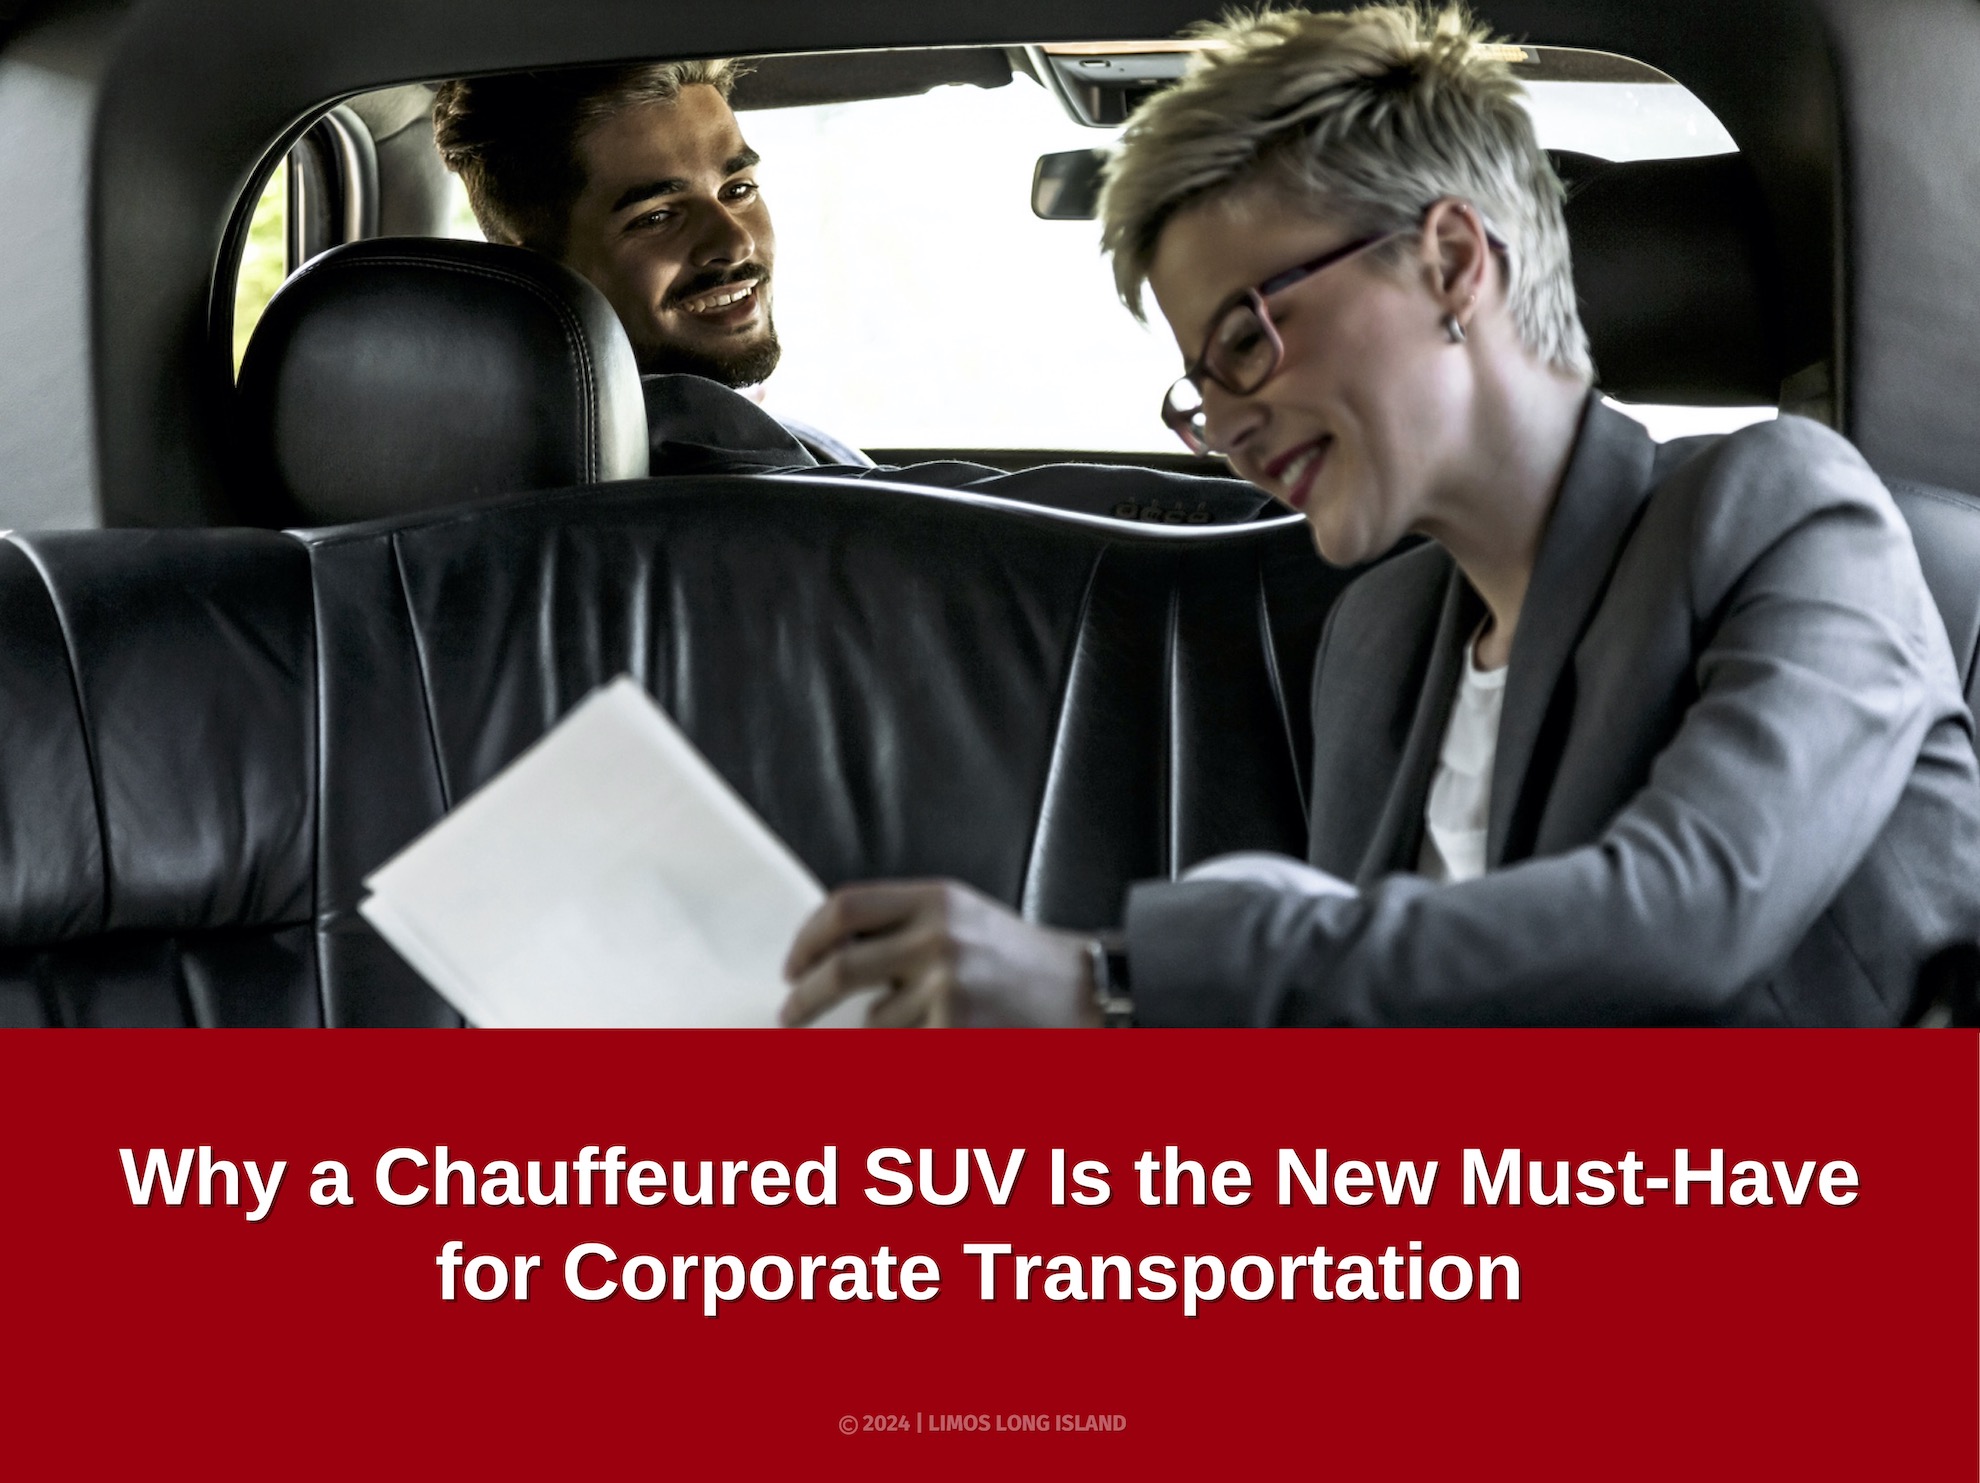 Why a Chauffeured SUV Is the New Must-Have for Corporate Transportation